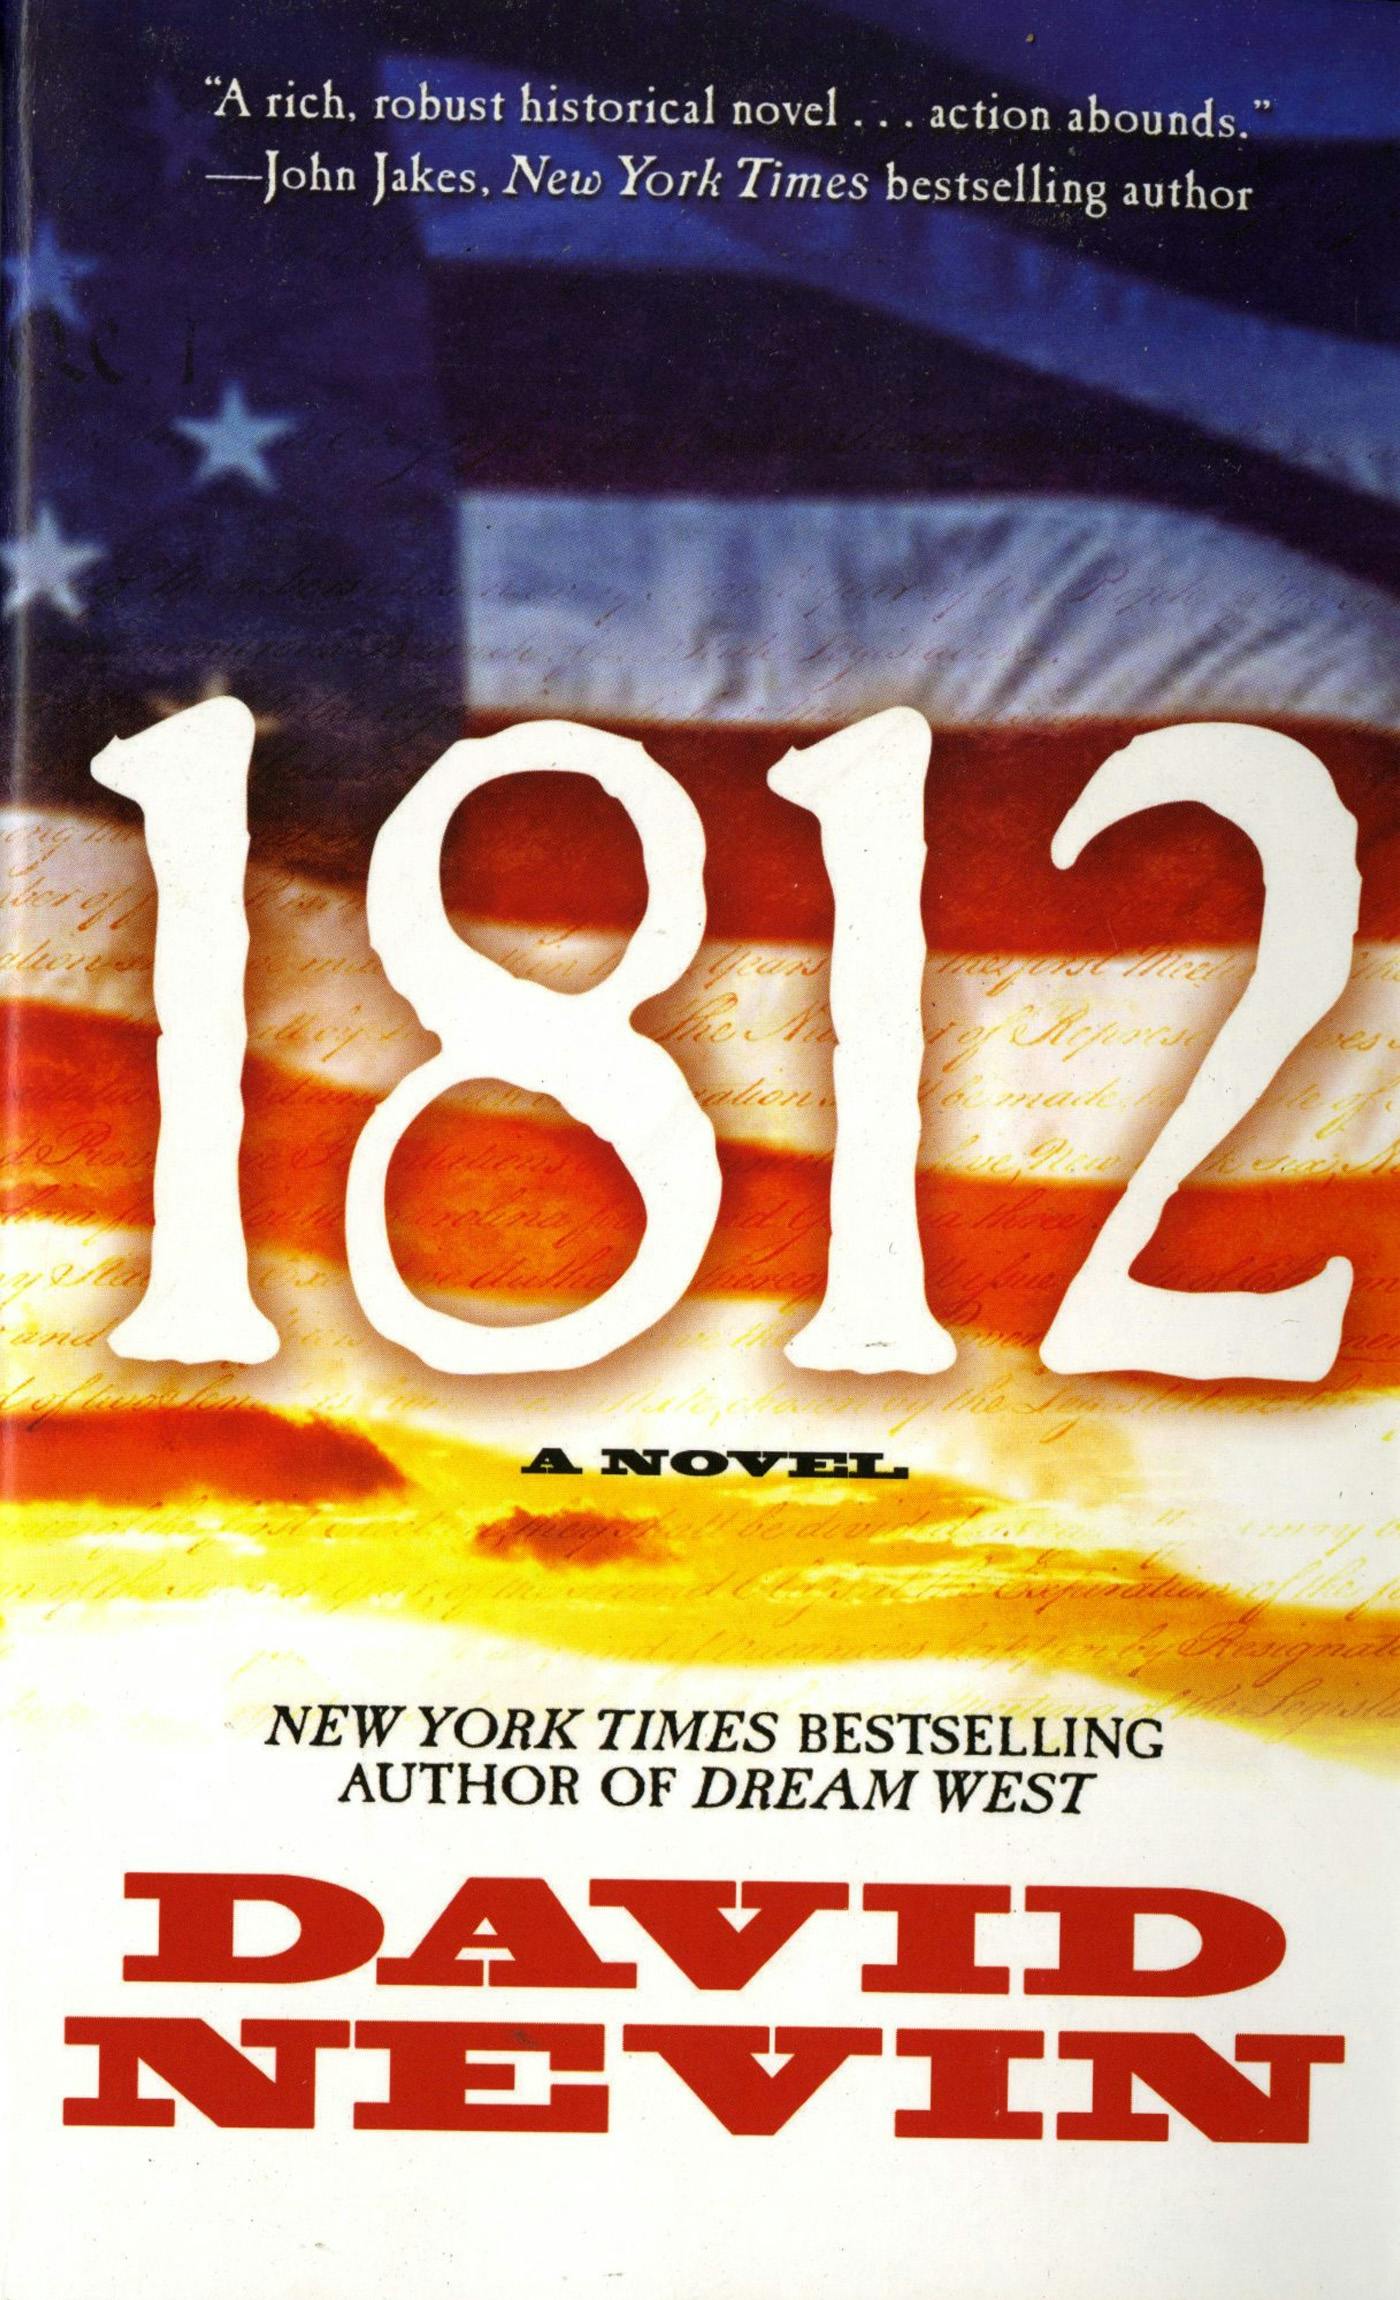 Cover for the book titled as: 1812